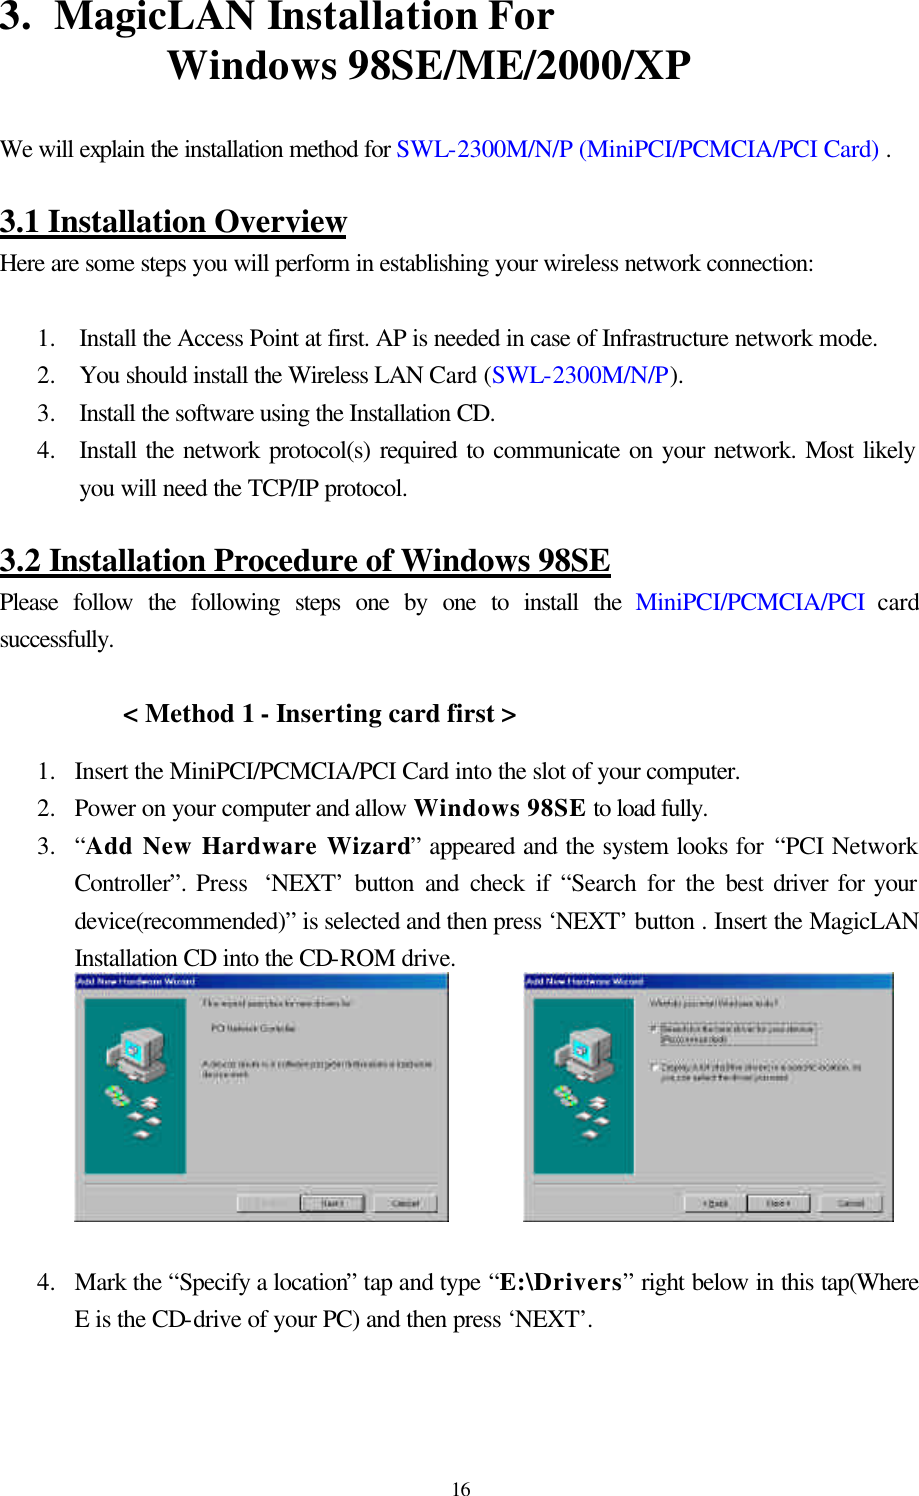  163.  MagicLAN Installation For                          Windows 98SE/ME/2000/XP  We will explain the installation method for SWL-2300M/N/P (MiniPCI/PCMCIA/PCI Card) .  3.1 Installation Overview Here are some steps you will perform in establishing your wireless network connection:  1.  Install the Access Point at first. AP is needed in case of Infrastructure network mode. 2.  You should install the Wireless LAN Card (SWL-2300M/N/P).  3.  Install the software using the Installation CD. 4.  Install the network protocol(s) required to communicate on your network. Most likely you will need the TCP/IP protocol.  3.2 Installation Procedure of Windows 98SE Please follow the following steps one by one to install the MiniPCI/PCMCIA/PCI card successfully.  &lt; Method 1 - Inserting card first &gt; 1.  Insert the MiniPCI/PCMCIA/PCI Card into the slot of your computer.  2.  Power on your computer and allow Windows 98SE to load fully.  3.  “Add New Hardware Wizard” appeared and the system looks for “PCI Network Controller”. Press  ‘NEXT’ button and check if “Search for the best driver for your device(recommended)” is selected and then press ‘NEXT’ button . Insert the MagicLAN Installation CD into the CD-ROM drive.                4.  Mark the “Specify a location” tap and type “E:\Drivers” right below in this tap(Where E is the CD-drive of your PC) and then press ‘NEXT’.  